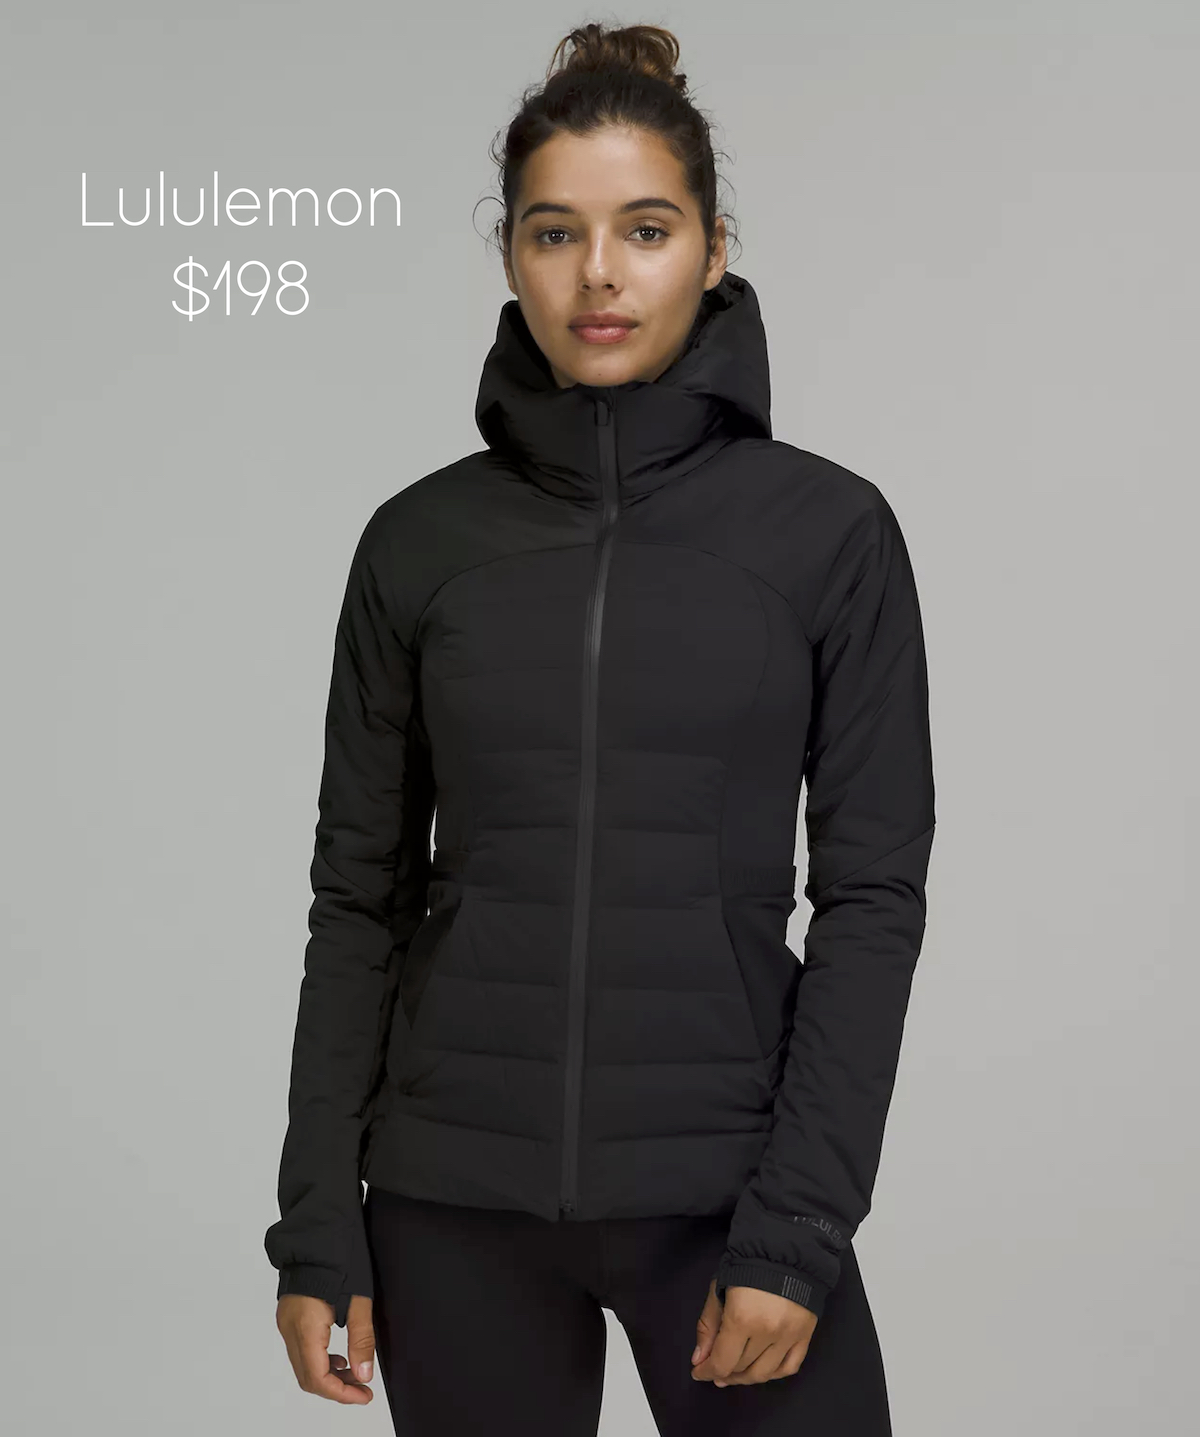 stock photo of woman wearing black quilted jacket from lululemon